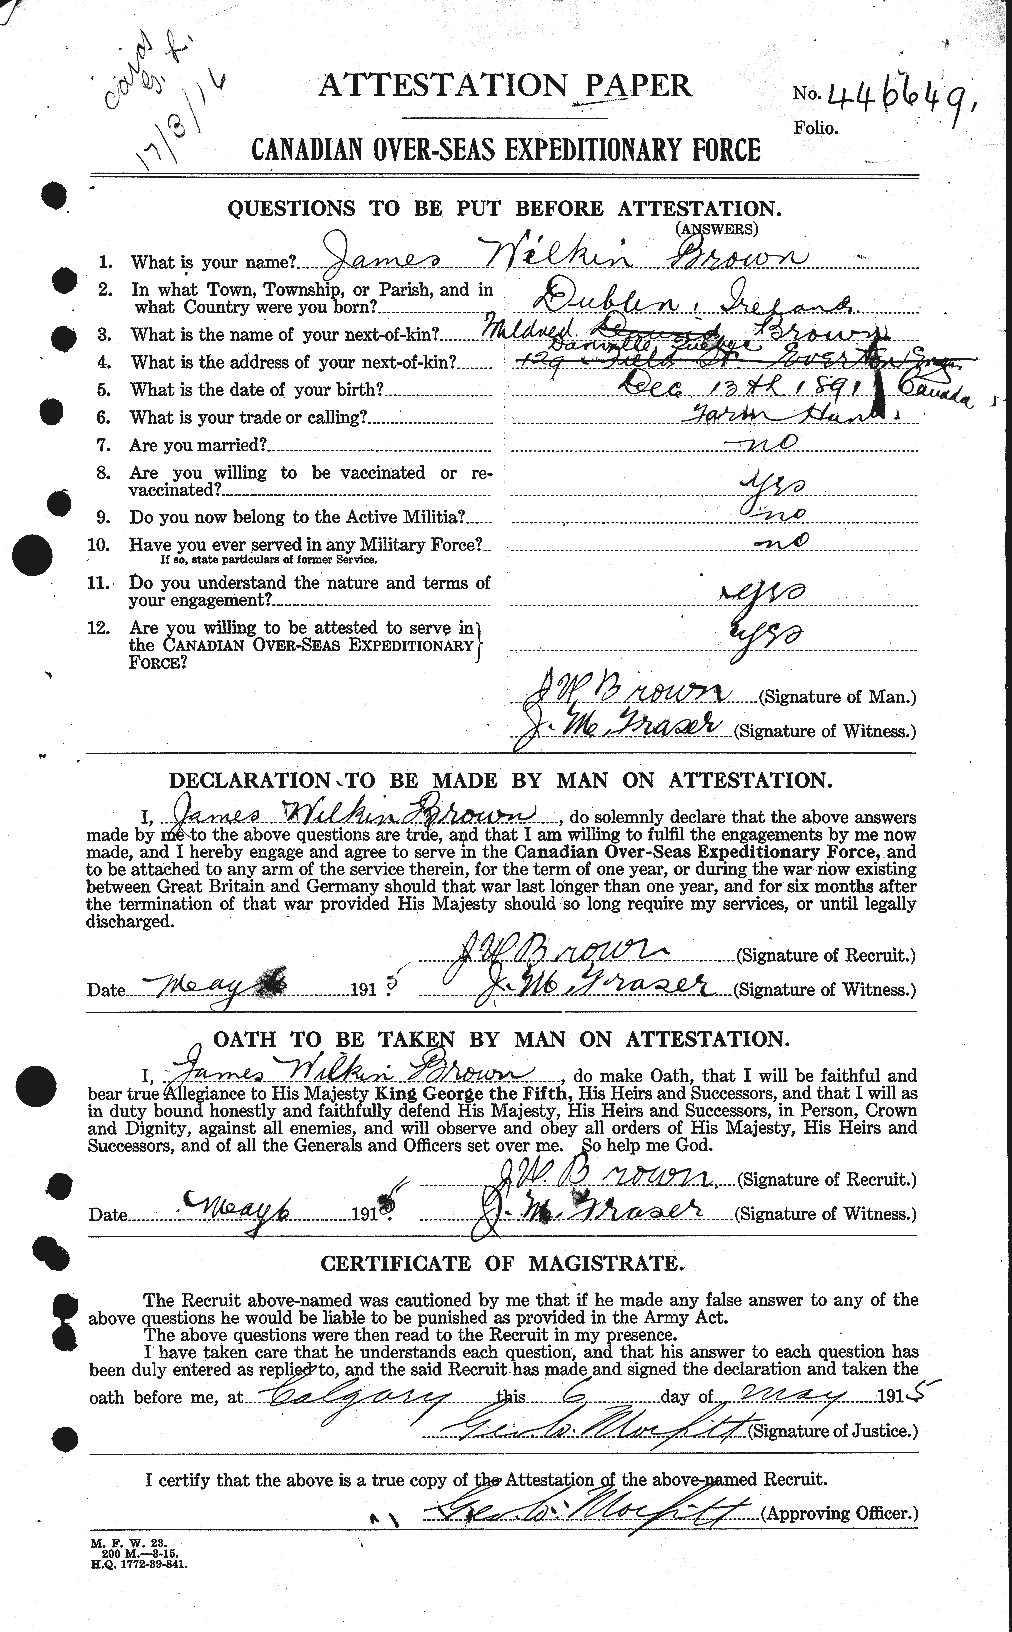 Personnel Records of the First World War - CEF 269599a